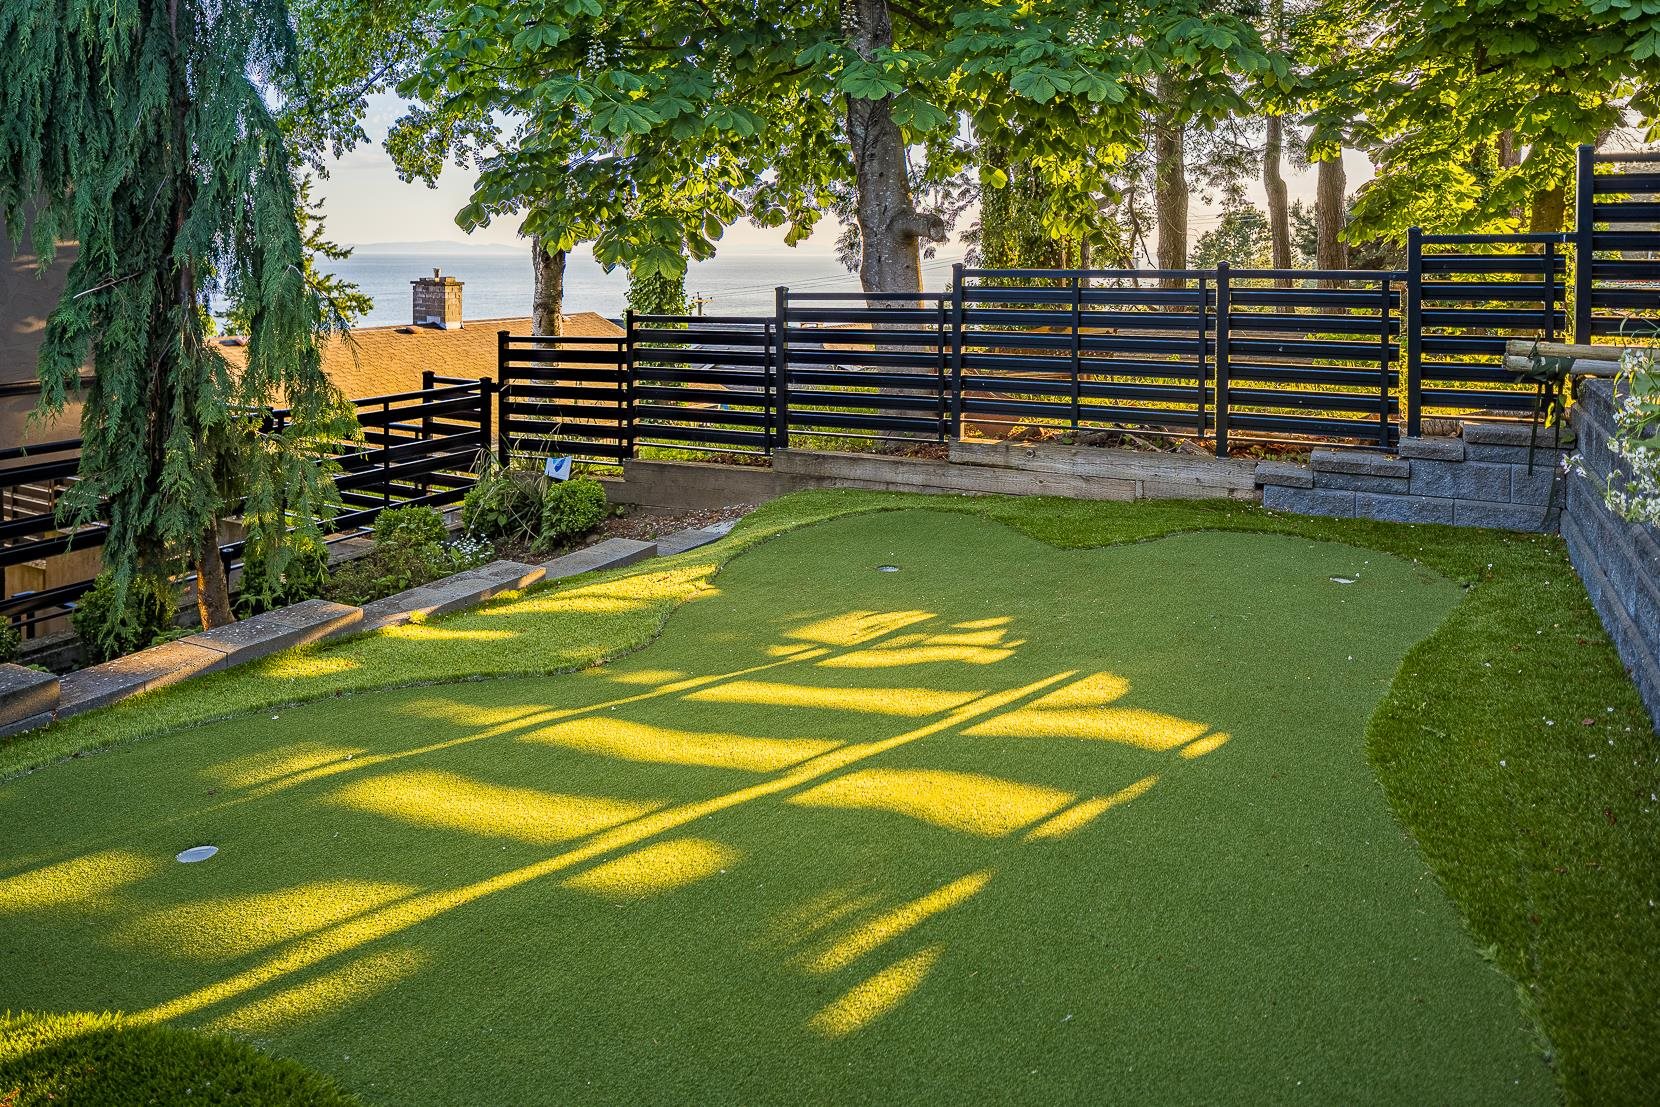 Private Putting Green: Sharpen your golf skills on your very own private putting green